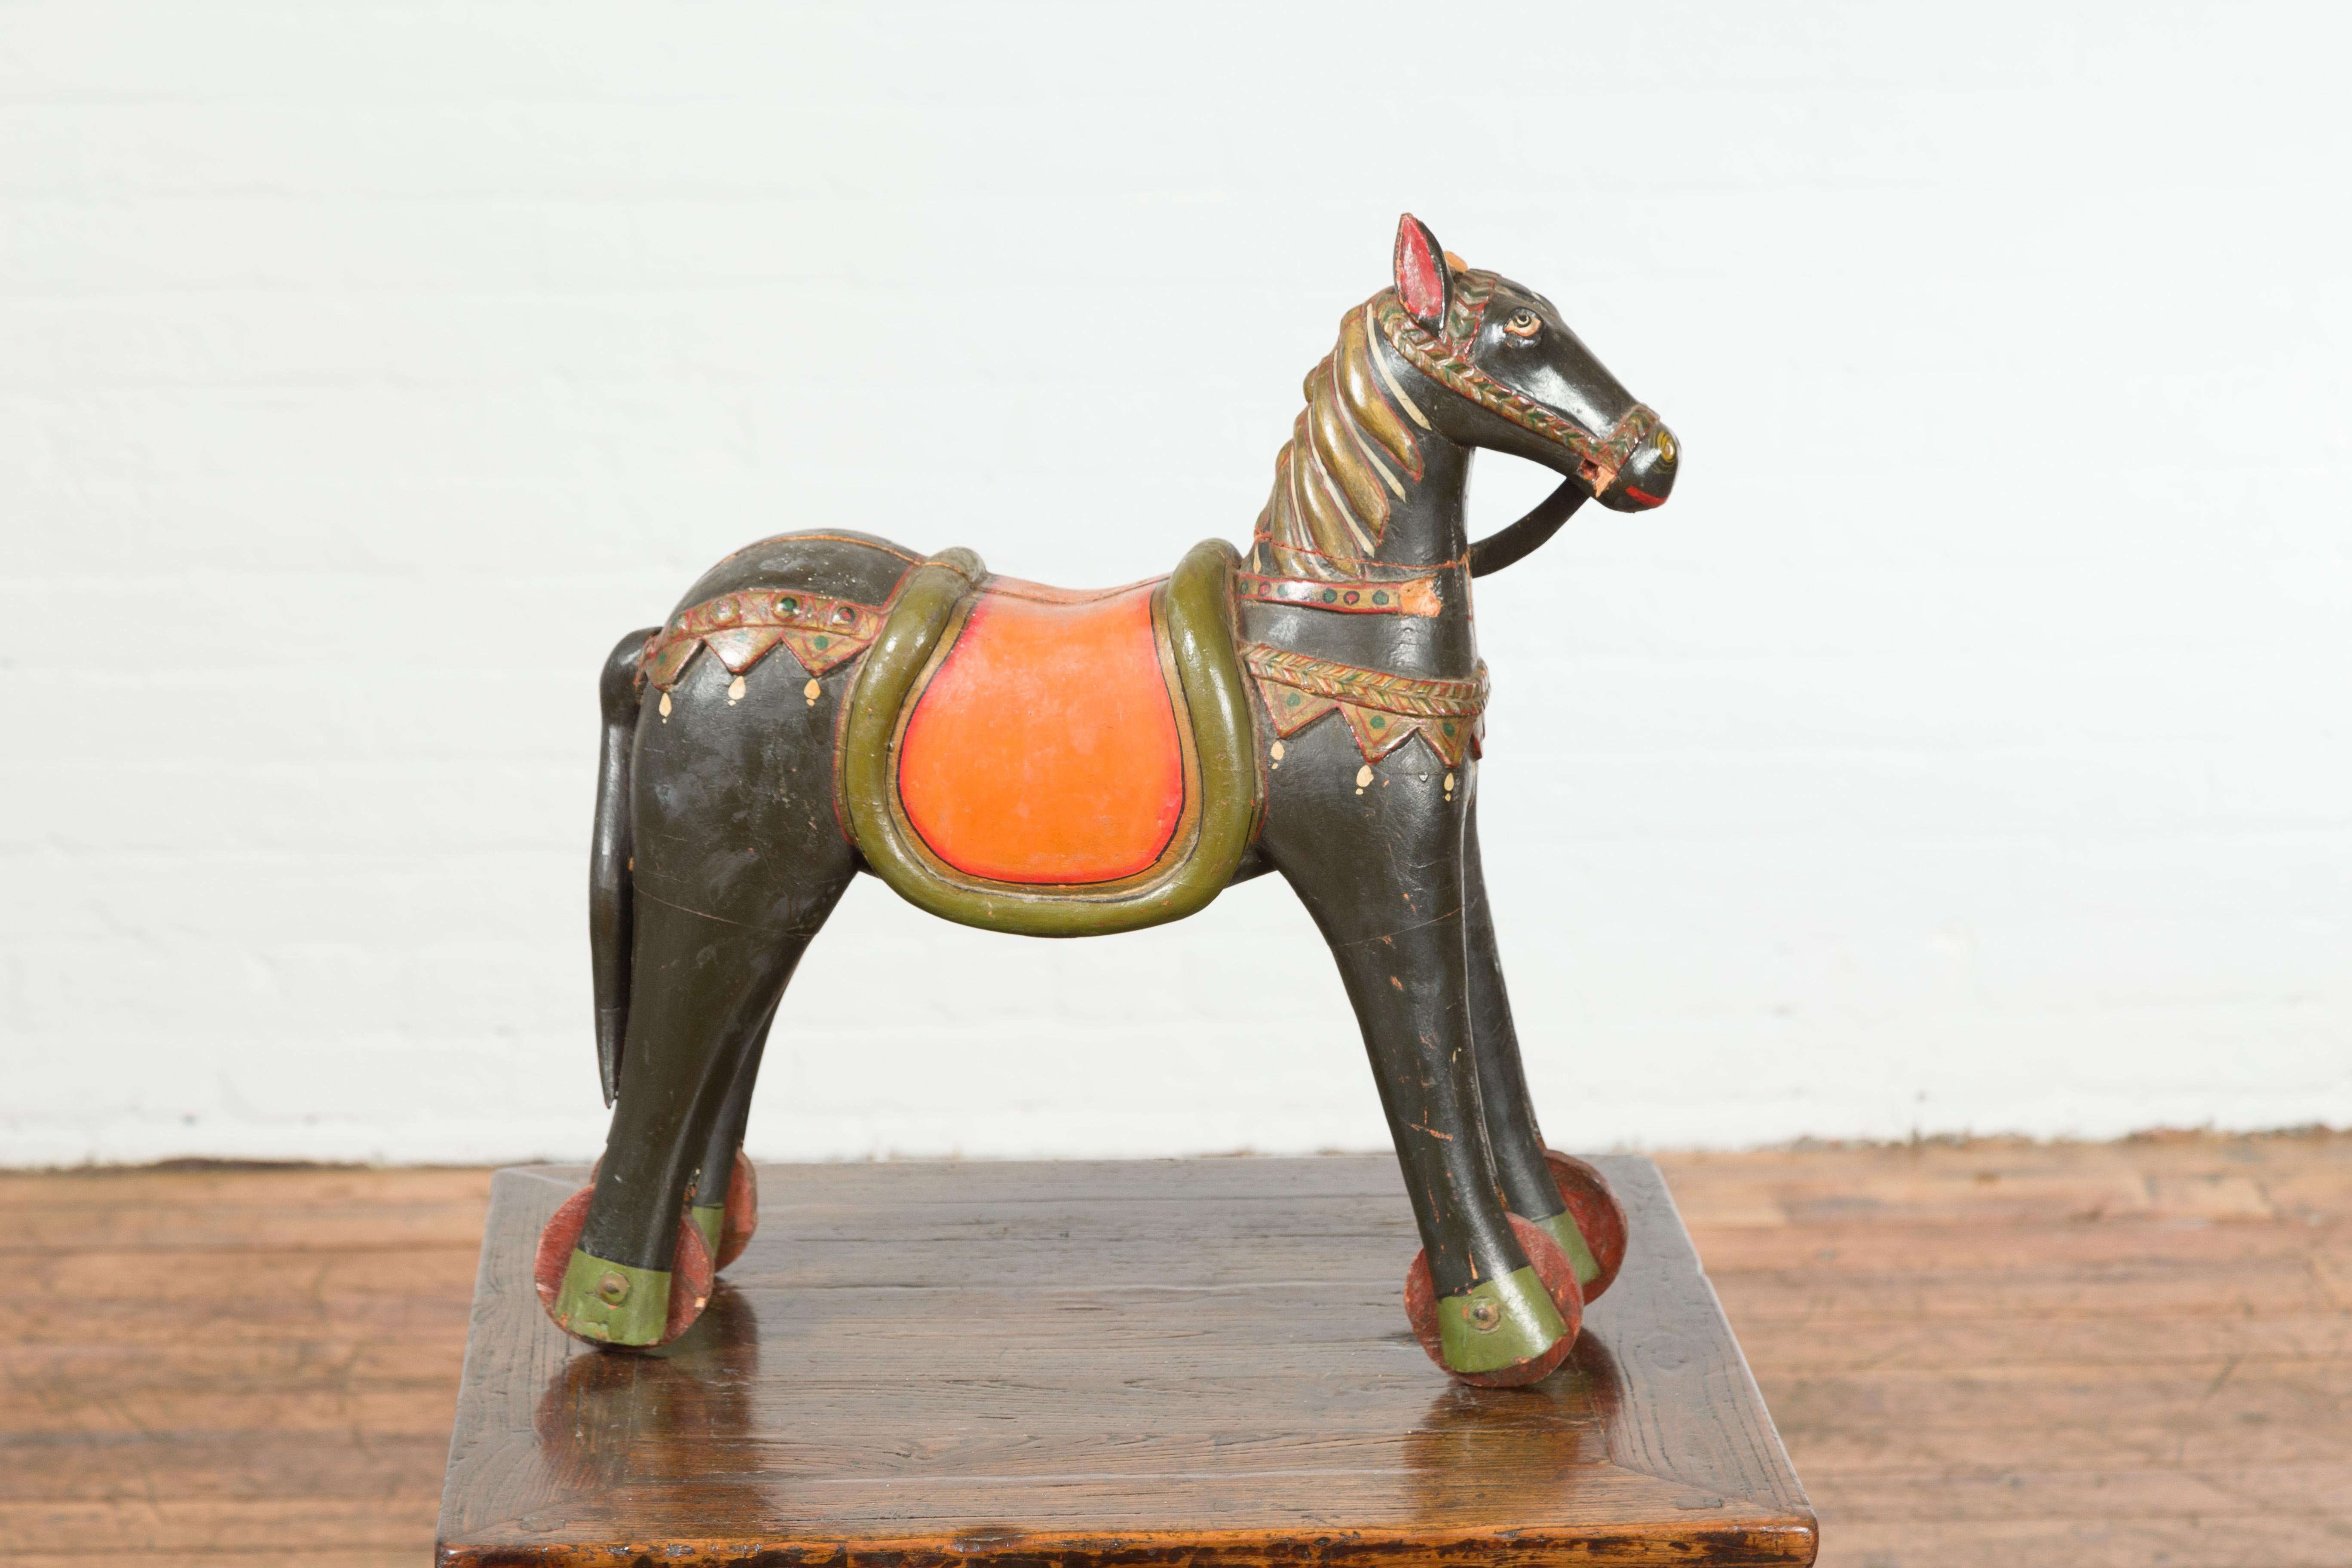 Antique Indian Mughal Horse on Wheels Sculpture with Polychrome Finish 6